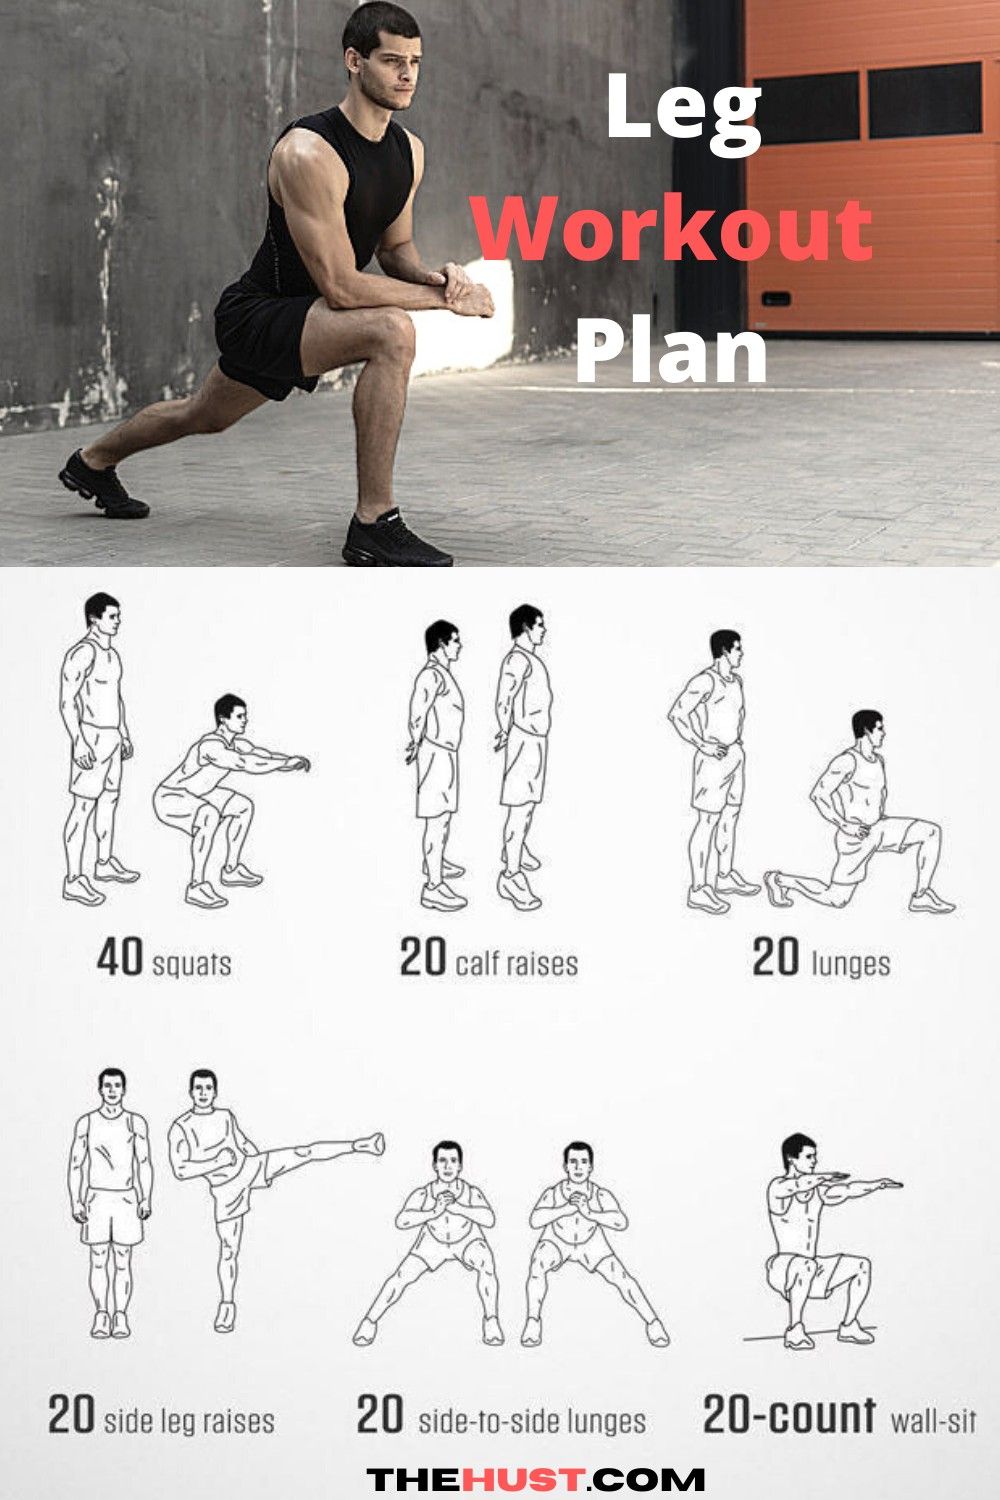 Best legs workout plan for muscle and strength in 2020